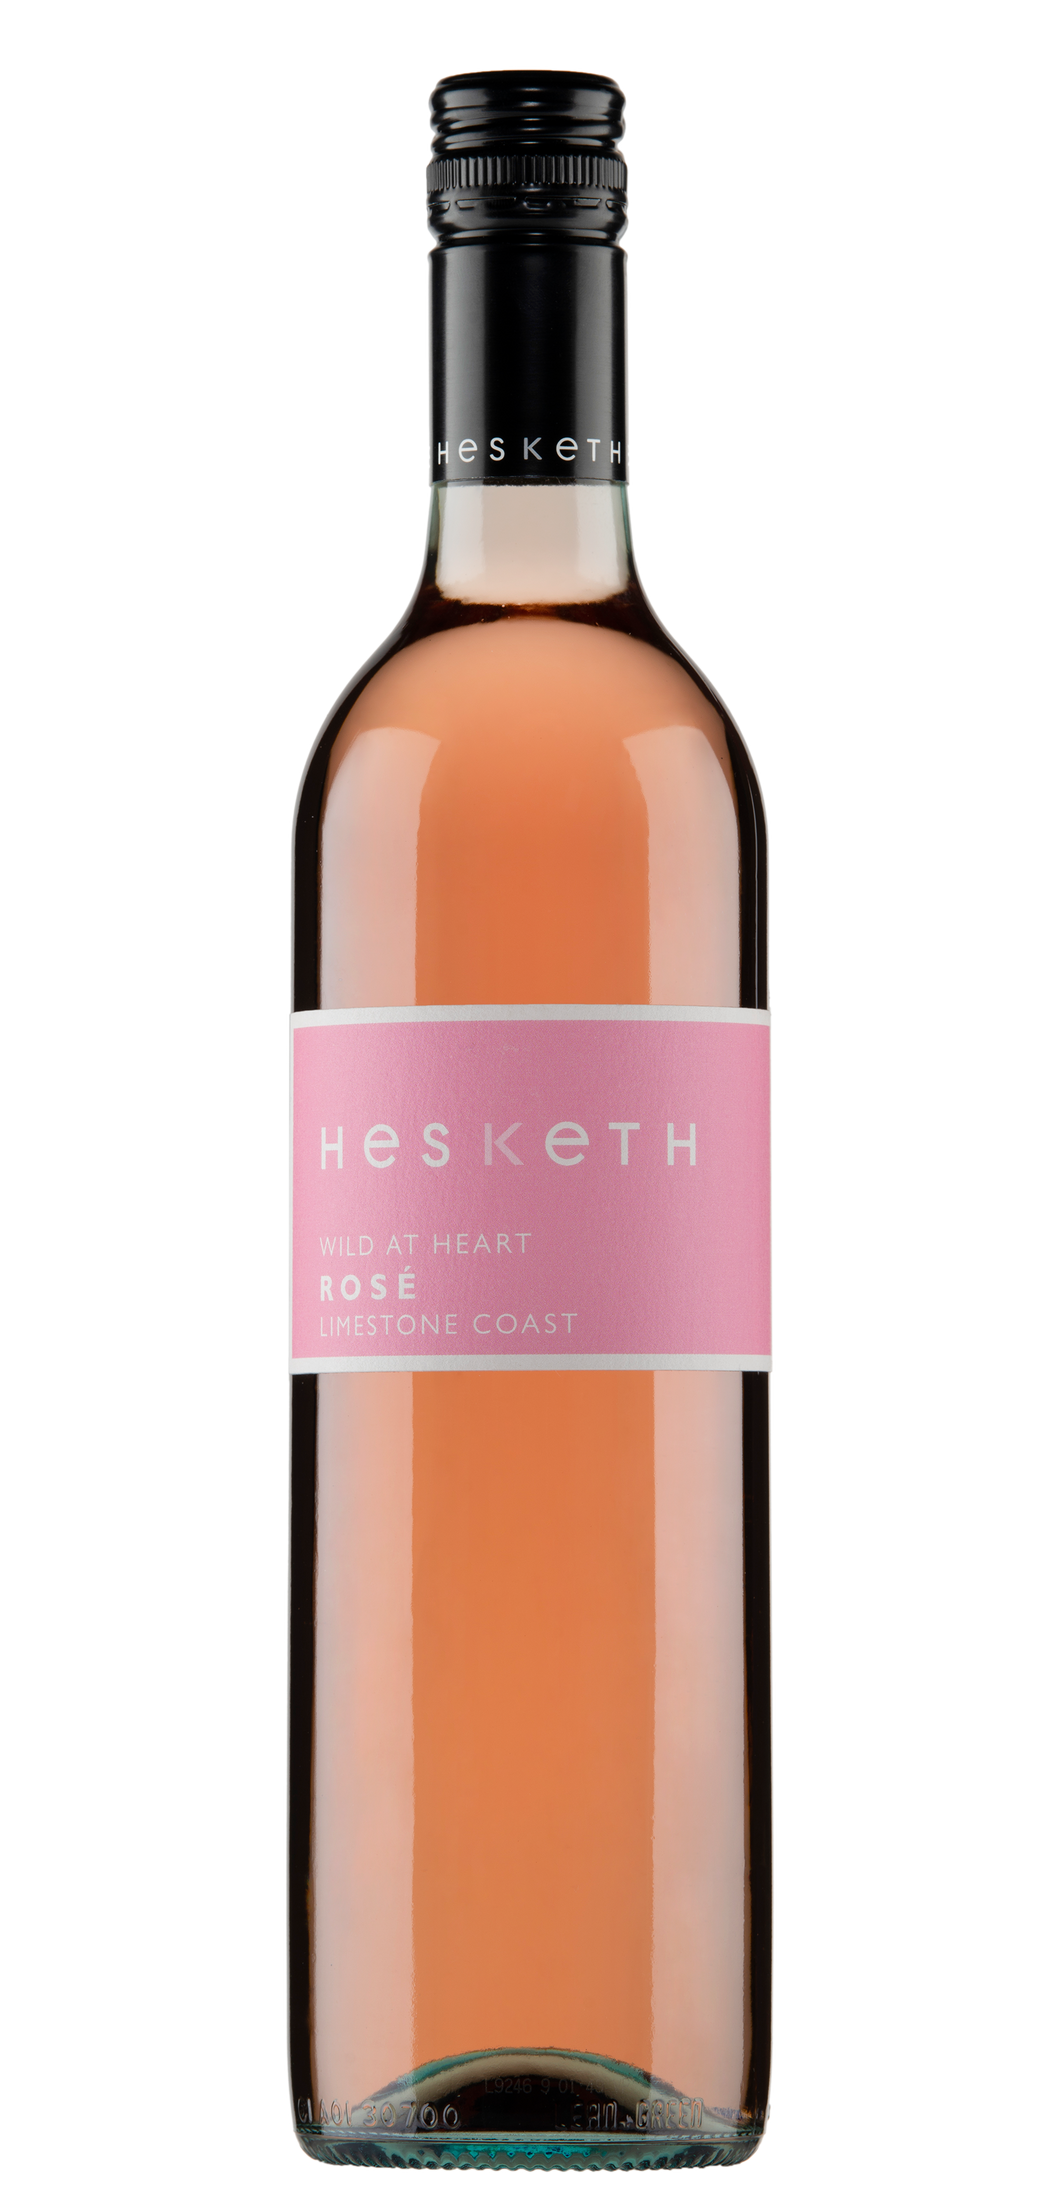 Hesketh Wild at Heart Rose 2020